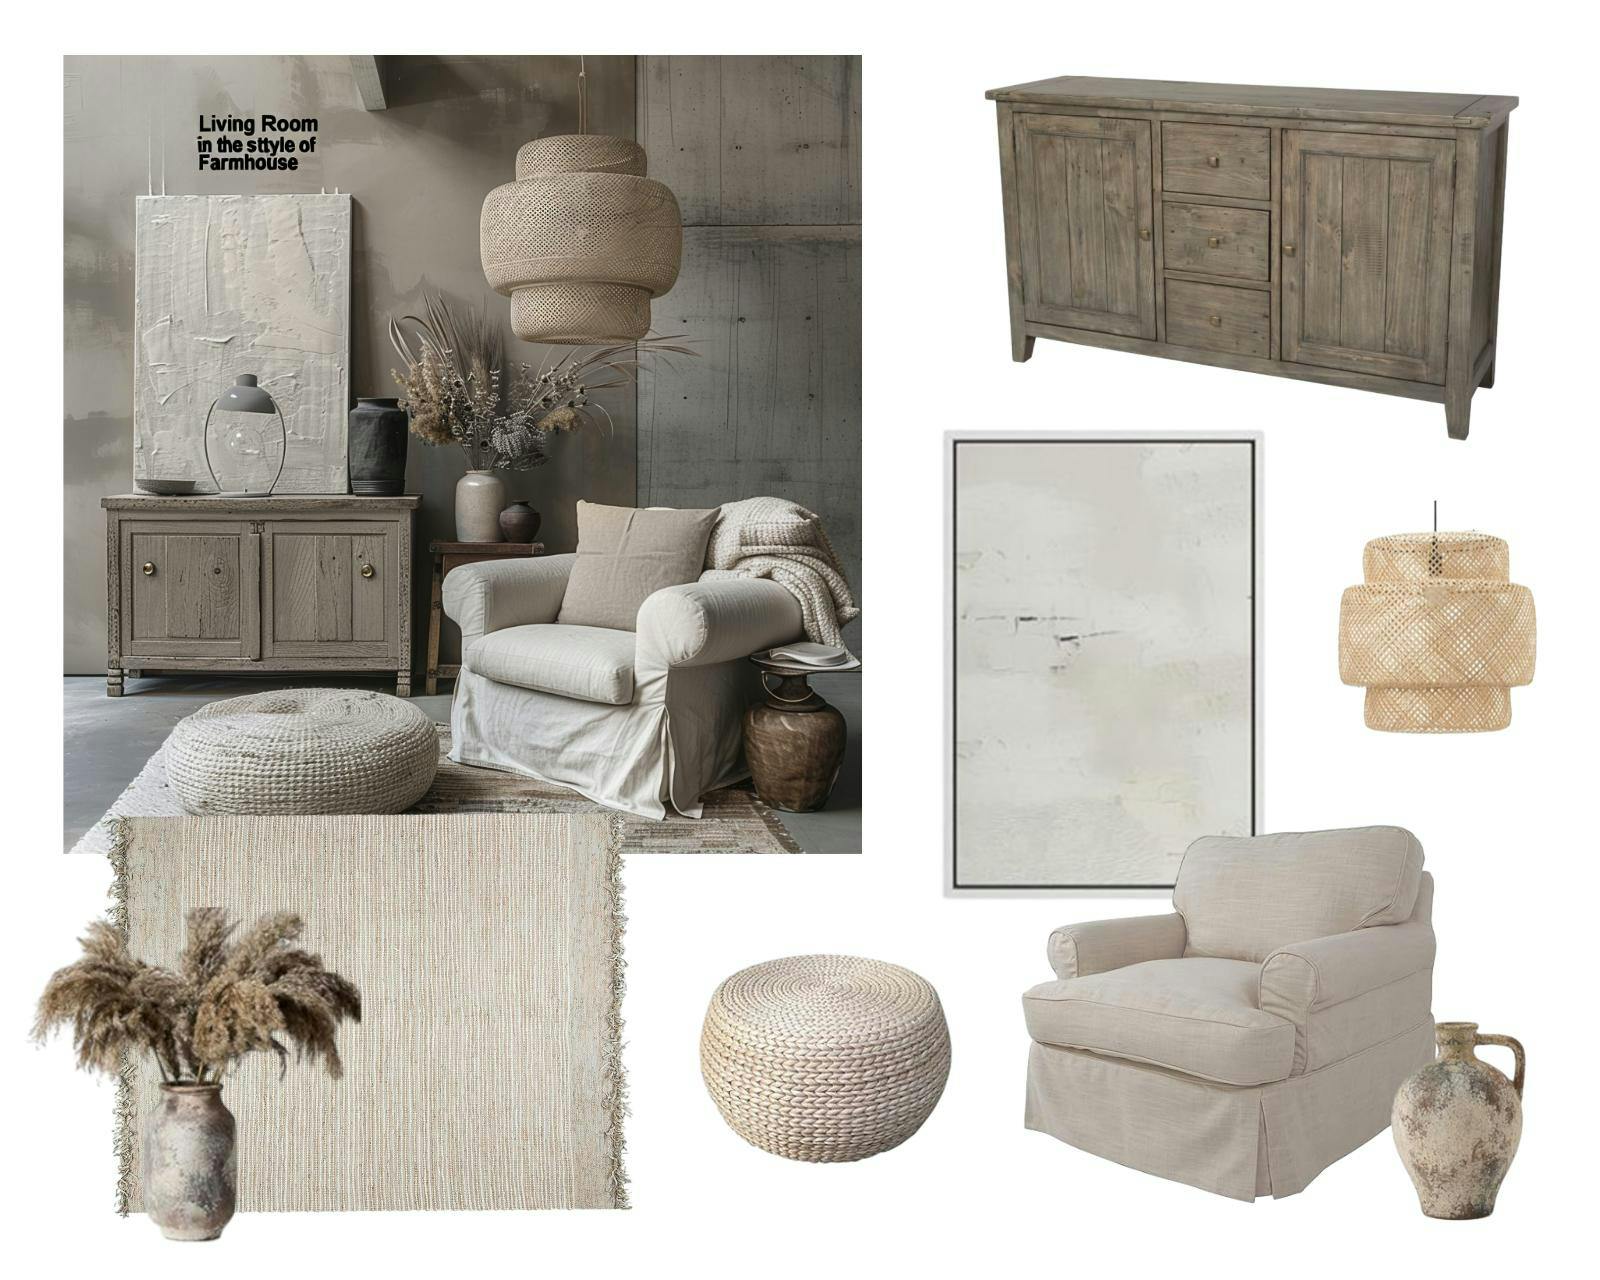 Living Room in Farmhouse Style Inspiration Board with Mood Board AI 